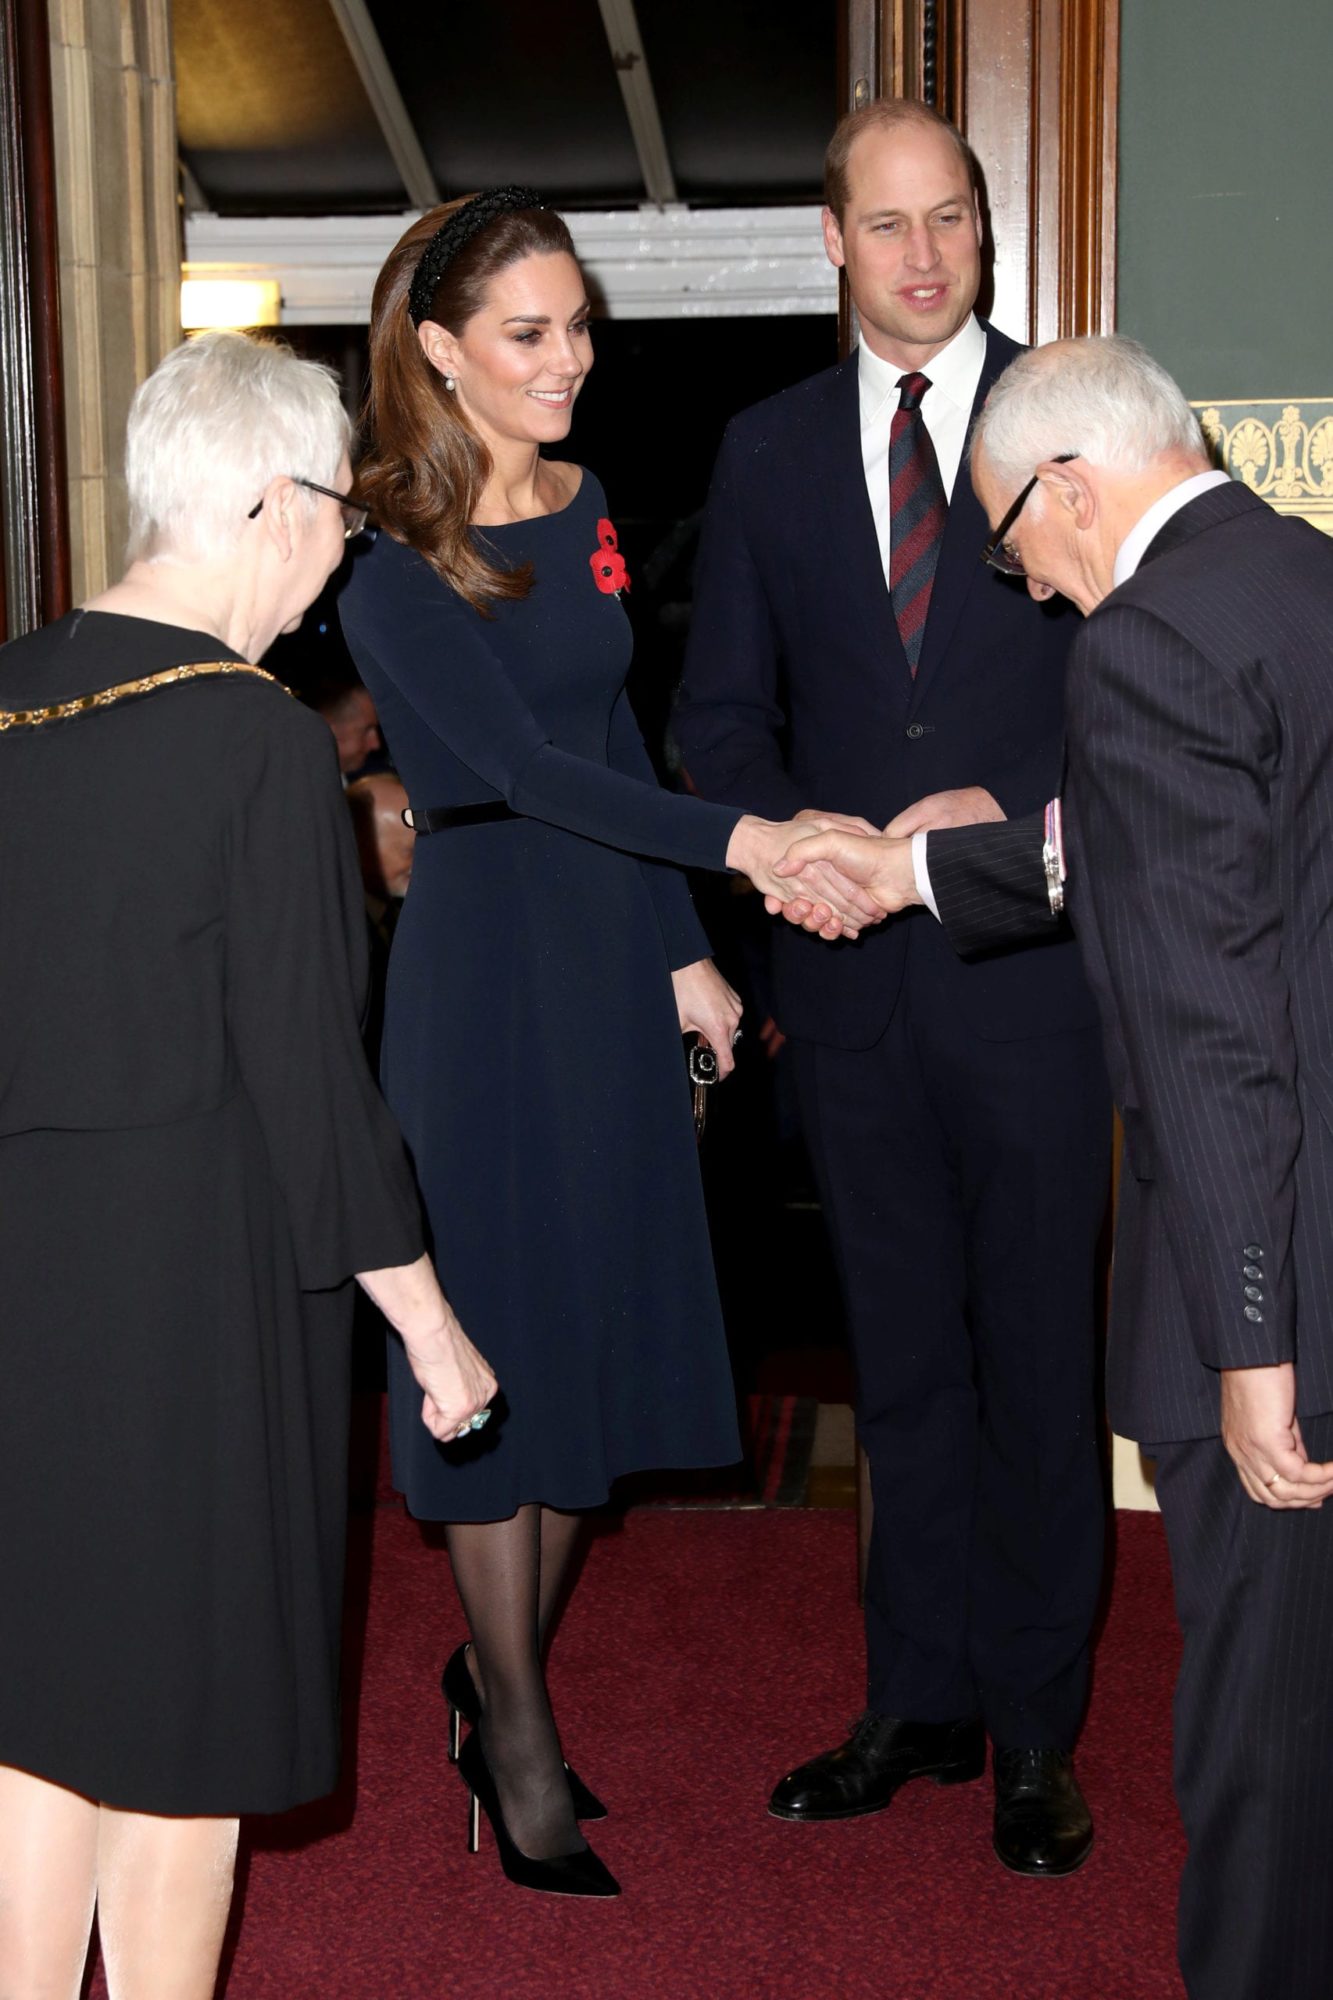 Britain's Prince William and Catherine, Duchess of Cambridge, attend the Royal British Legion Festival of Remembrance at the Royal Albert Hall in London, Britain November 9, 2019.  /Pool via REUTERS - RC2V7D9KAFU0